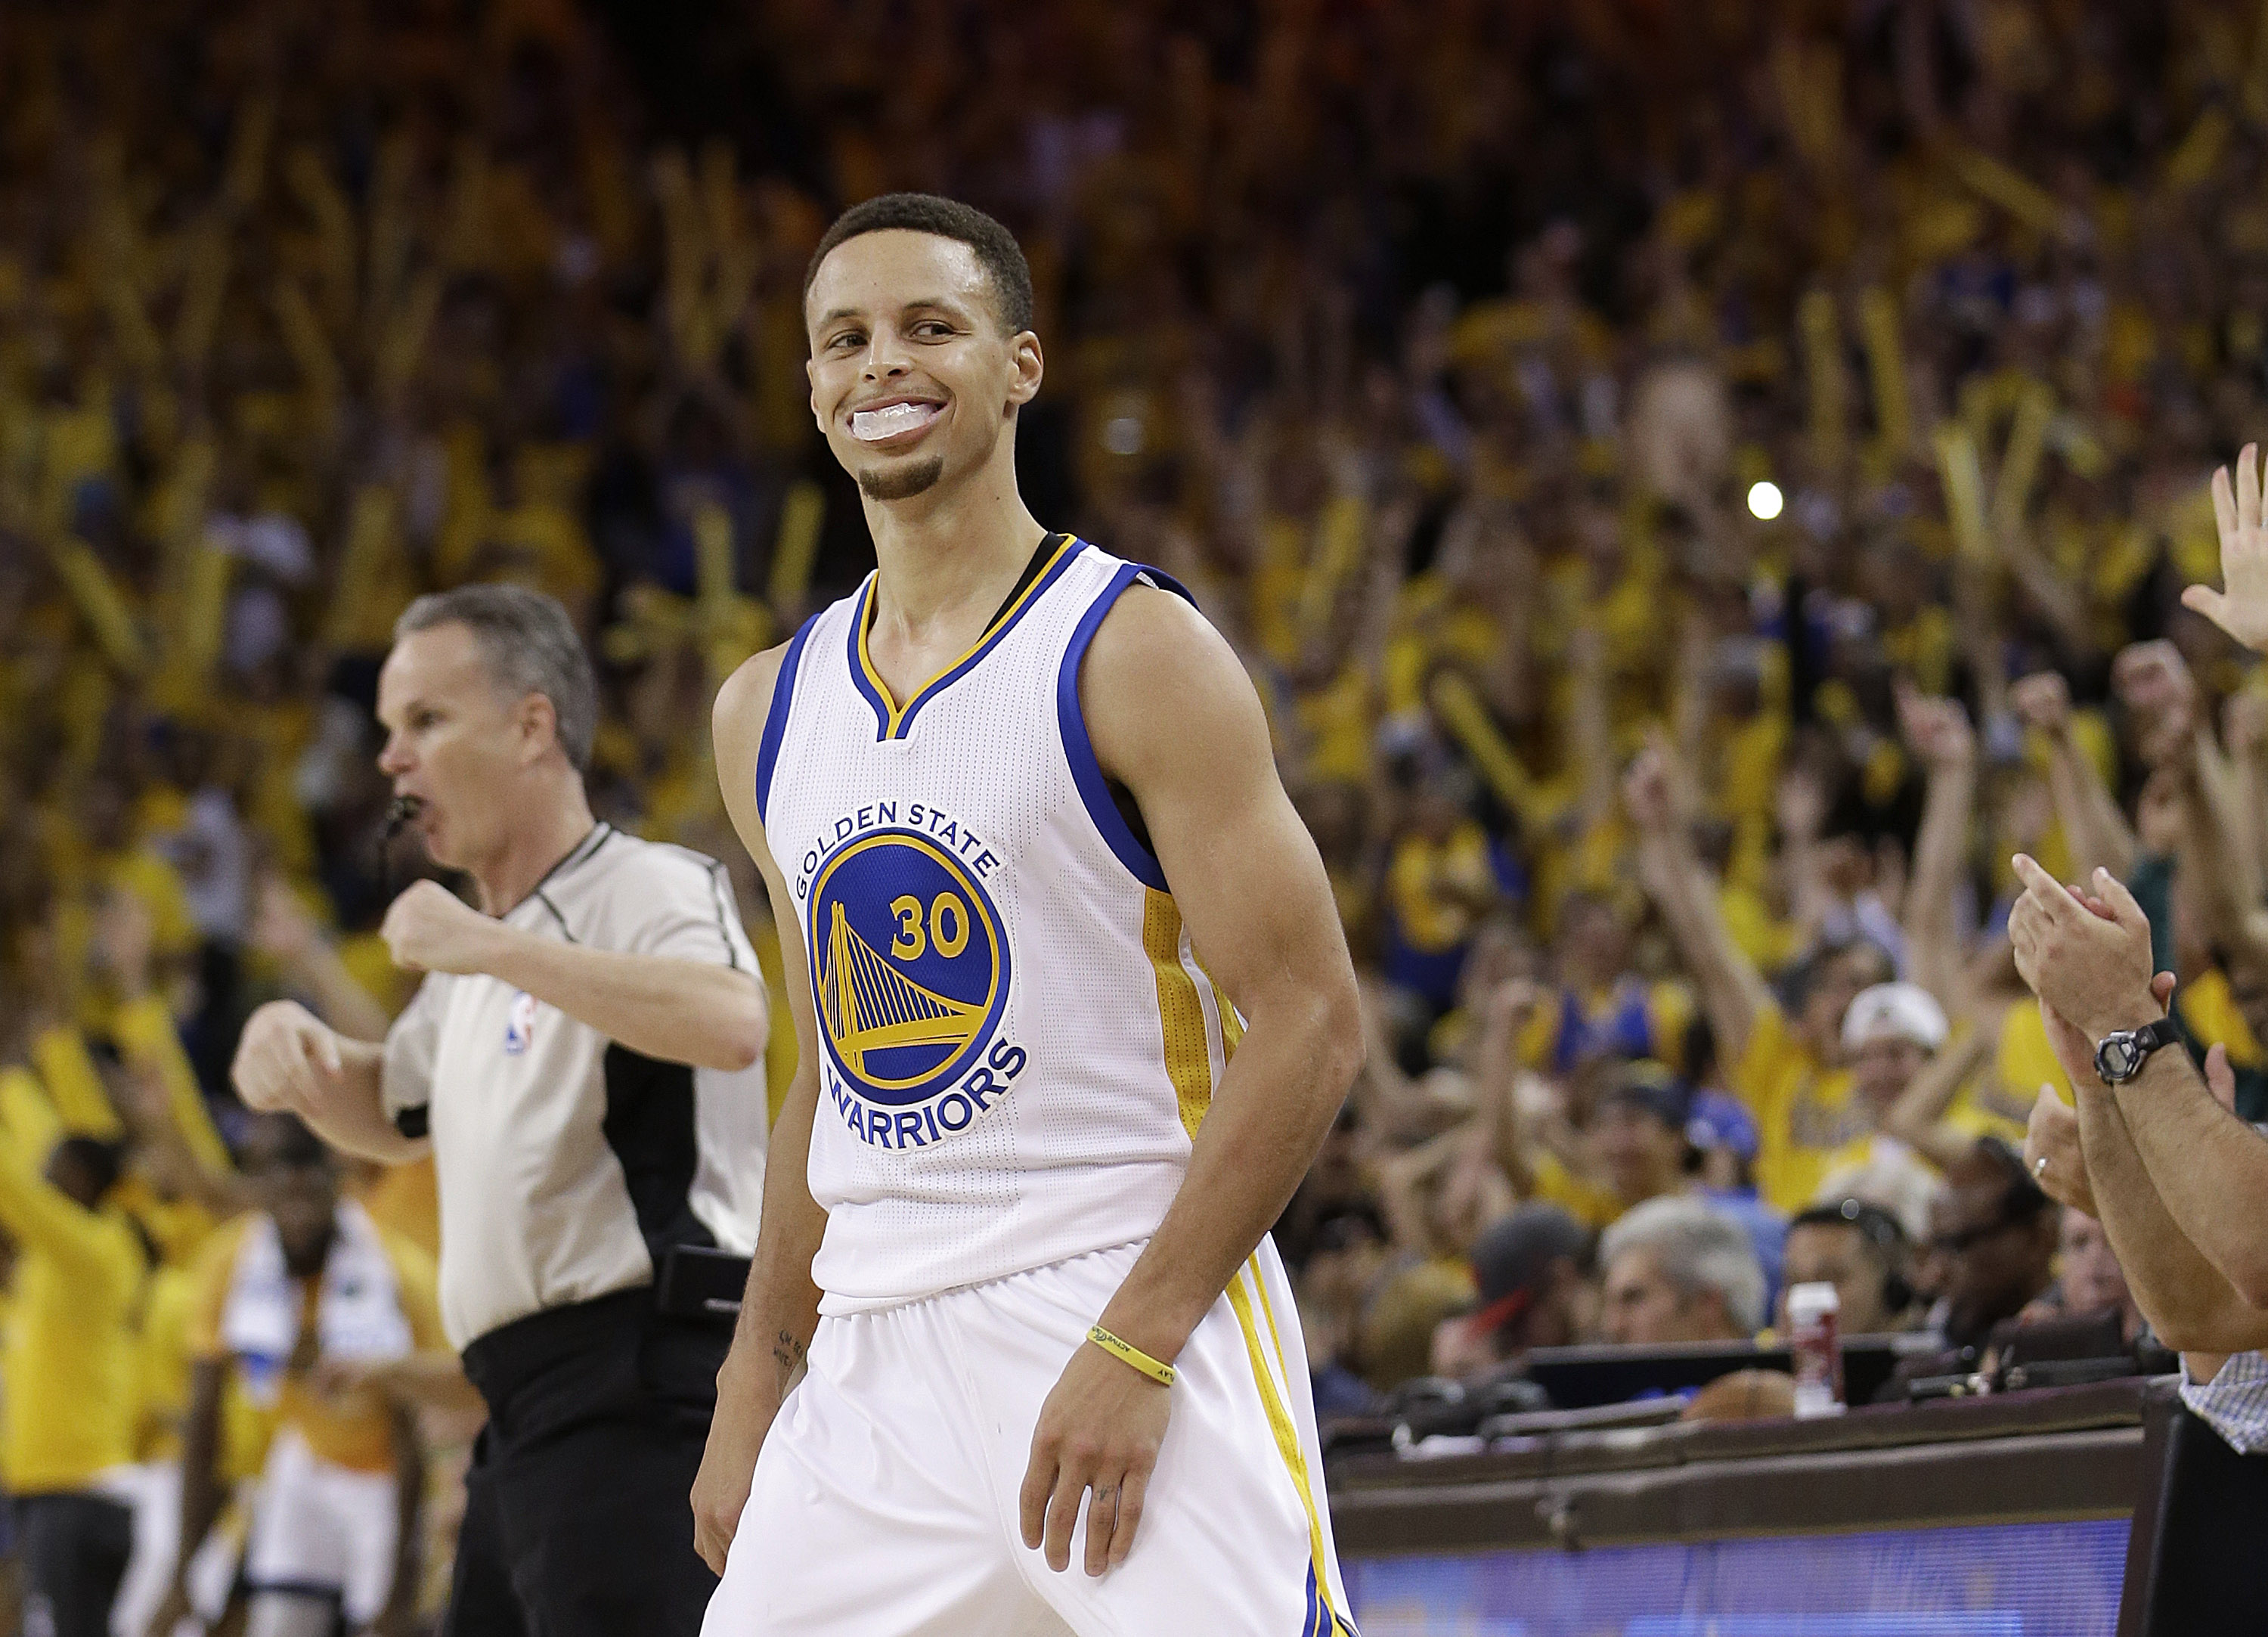 Golden State Warriors guard Stephen Curry (30) smiles after scoring against the Oklahoma City Thunder during the second half of Game 2 of the NBA basketball Western Conference finals in Oakland, Calif., Wednesday, May 18, 2016. AP